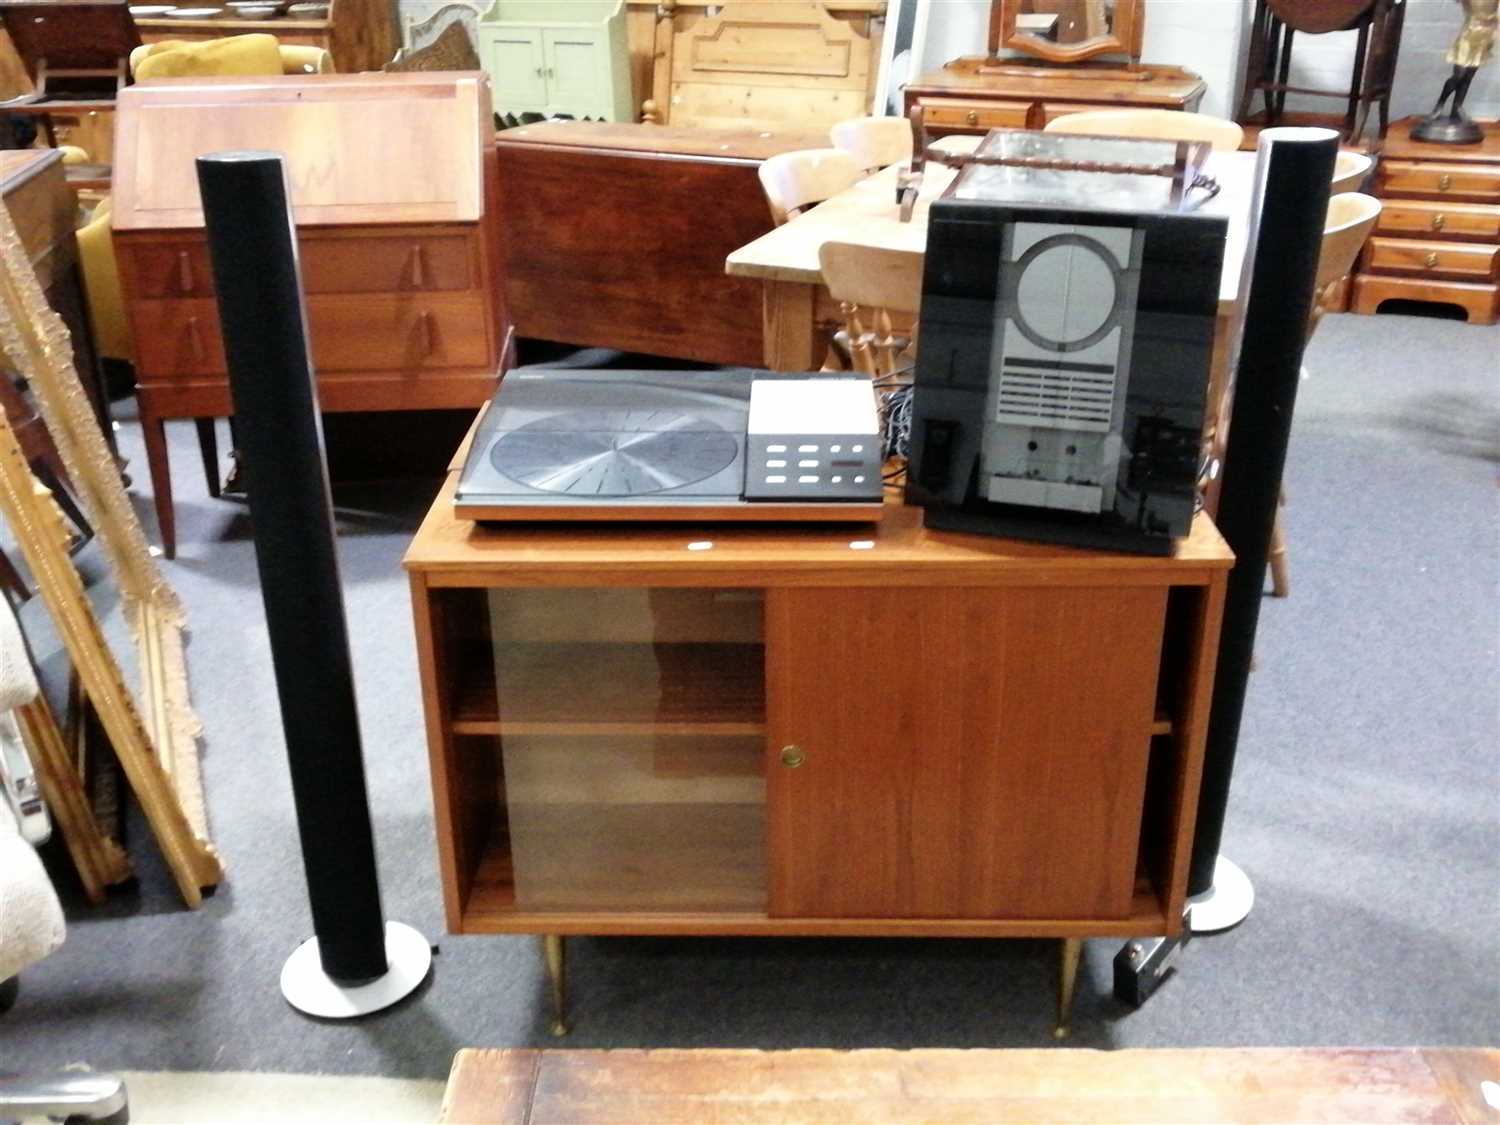 Lot 61 - Bang & Olufsen home audio; including Beogram 8002 record plater, speakers and CD player